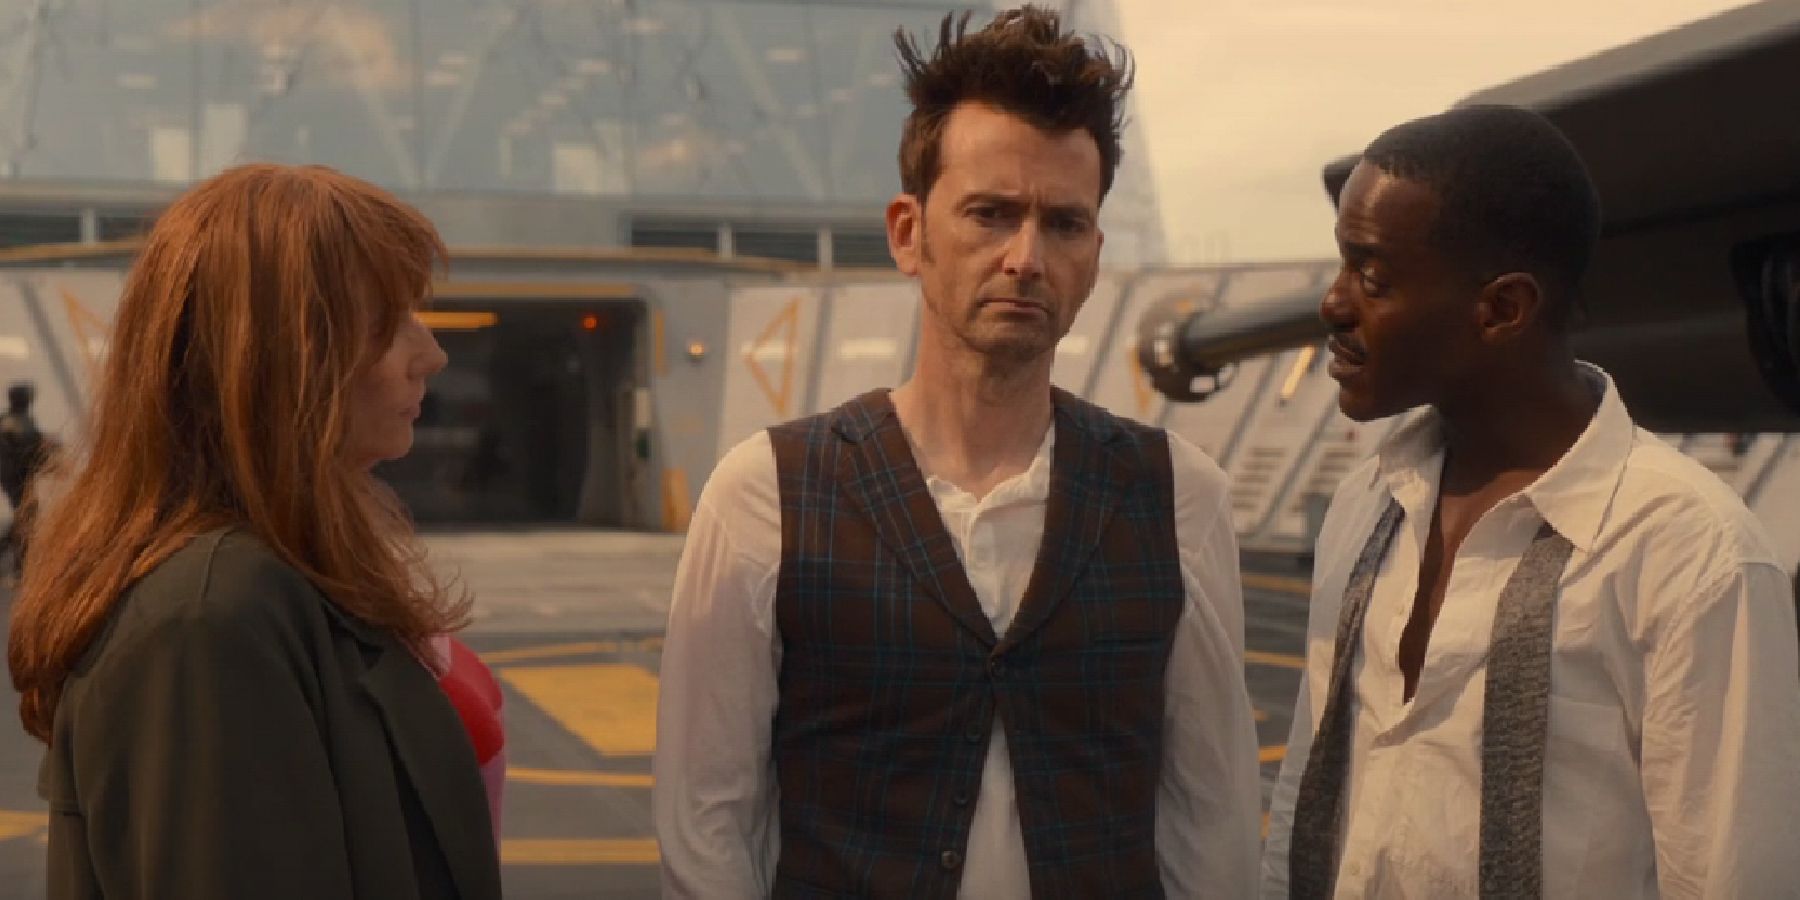 Donna, David Tennant's Foureenth Doctor, and Ncuti Gatwa's Fifteenth Doctor at UNIT HQ in Doctor Who.